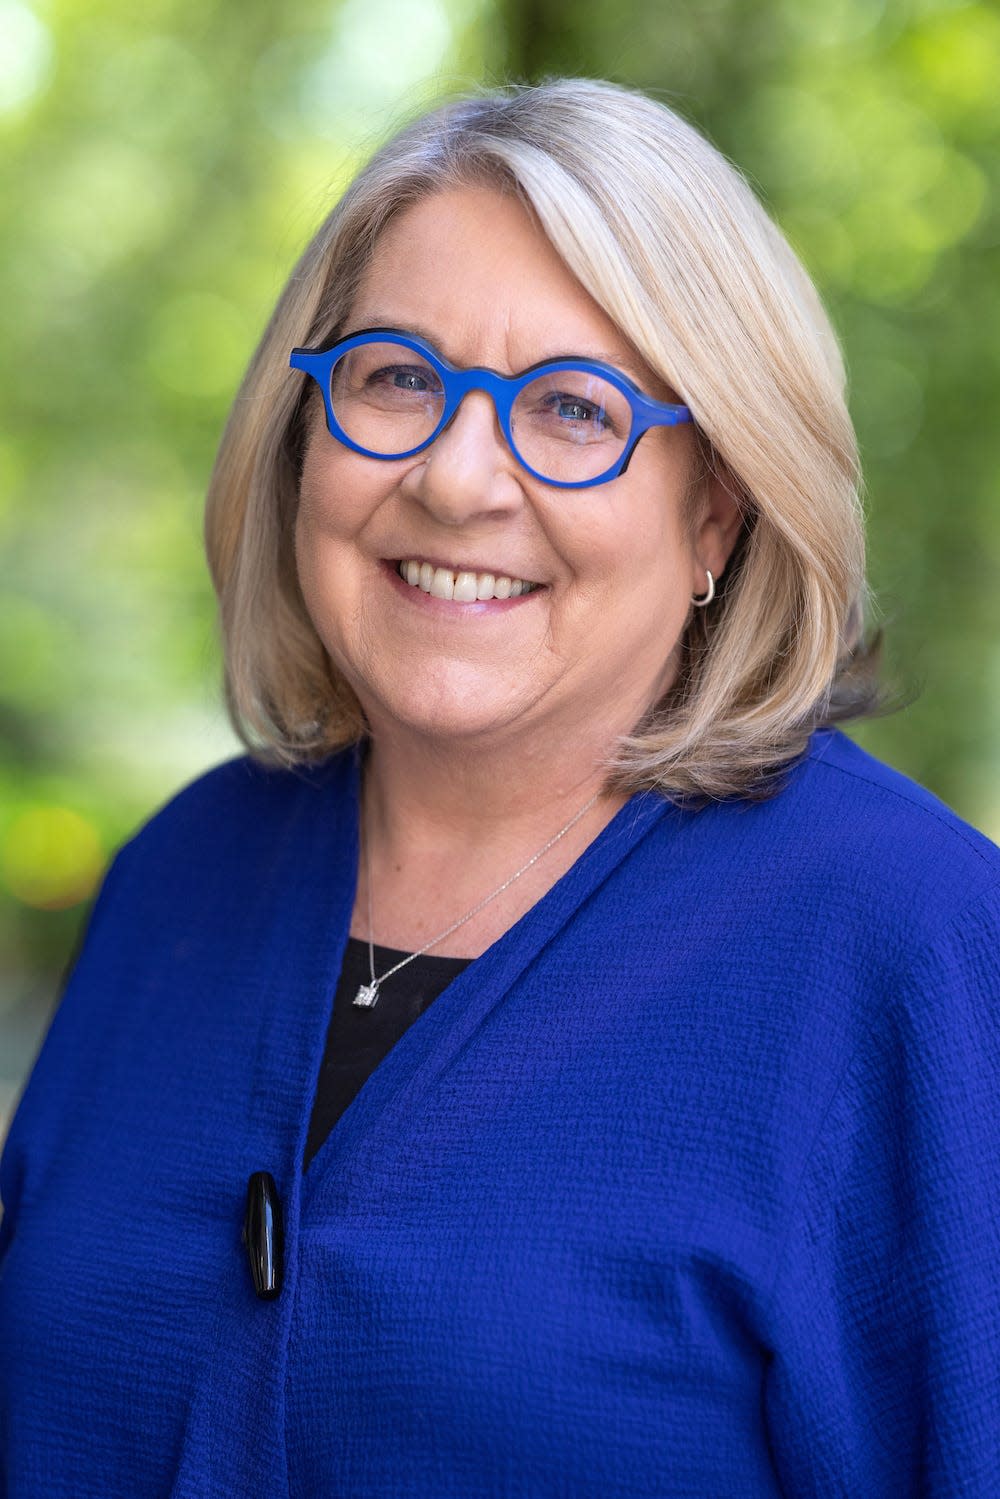 Kimberly van Noort has been named the ninth chancellor of UNC Asheville following a vote by the University of North Carolina Board of Governors on Nov. 29, 2023.